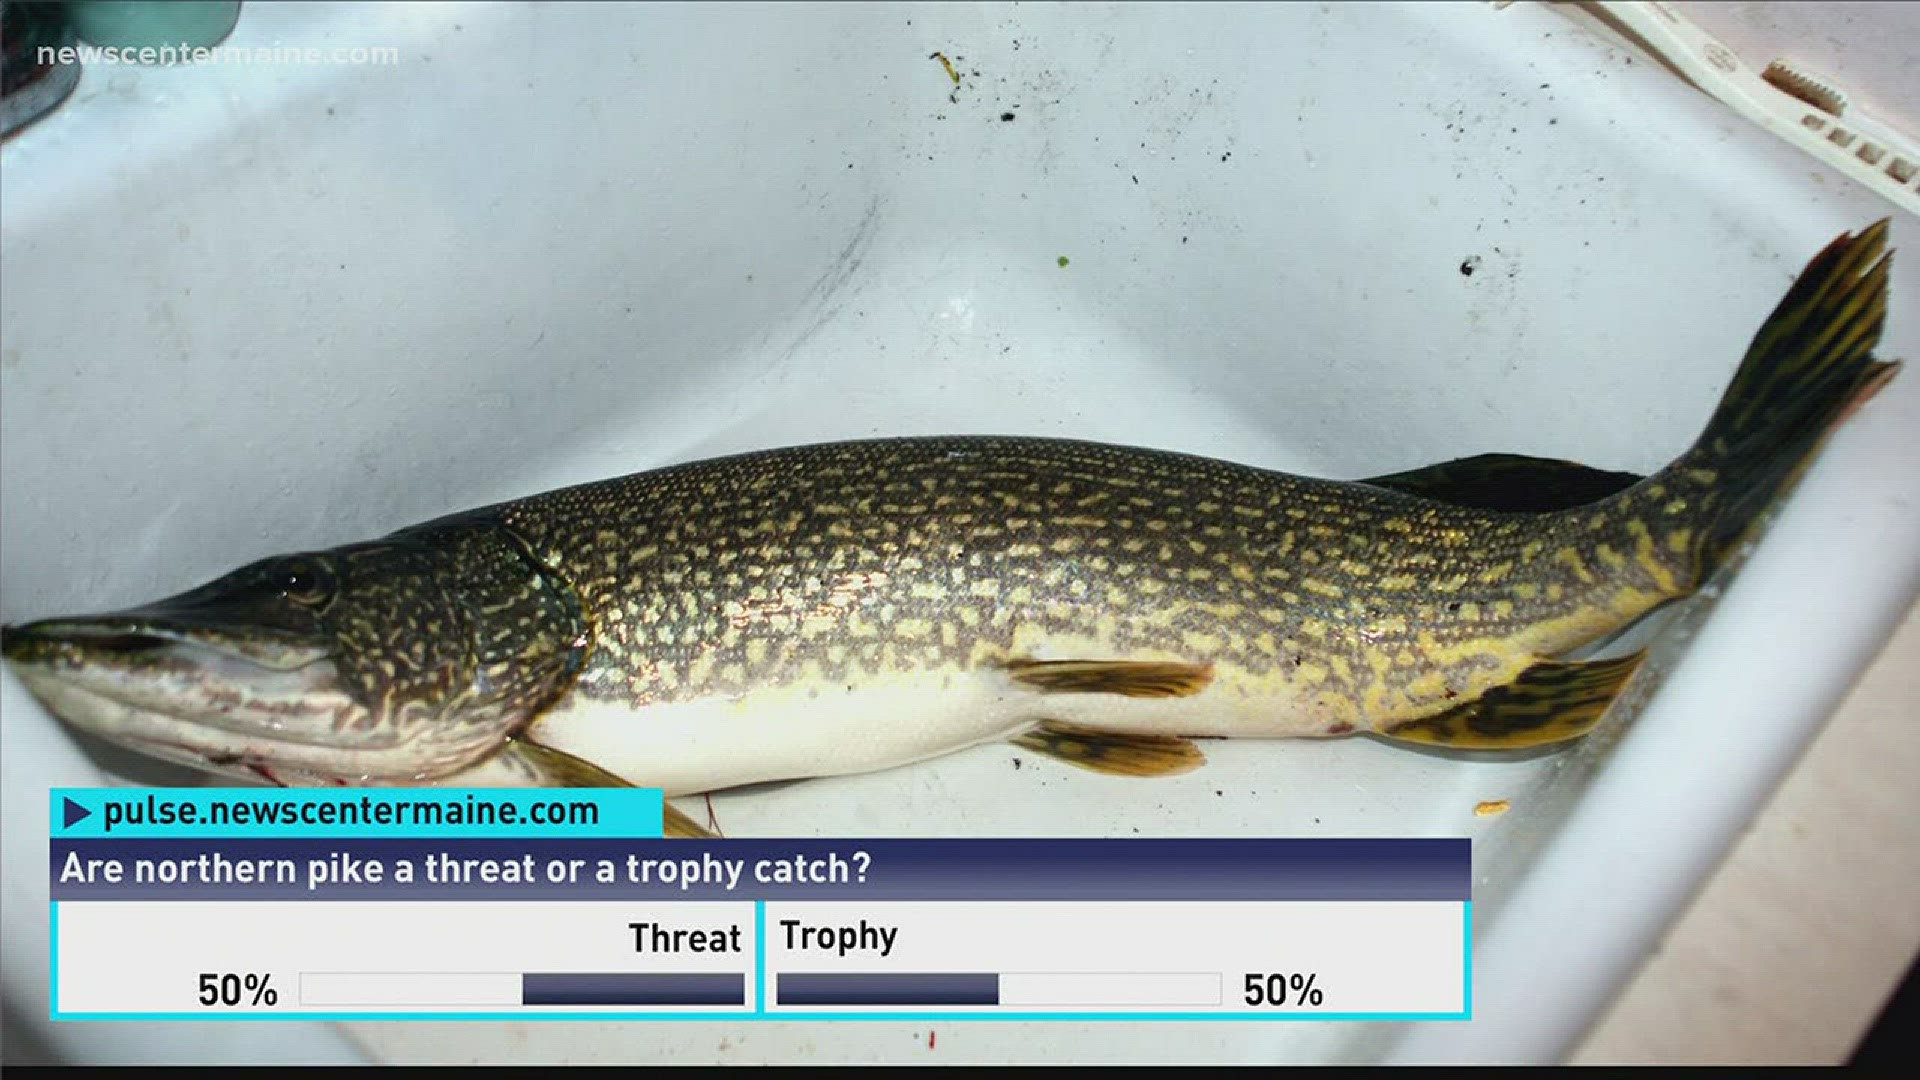 Is the fish a cool trophy or serious threat to our lakes?